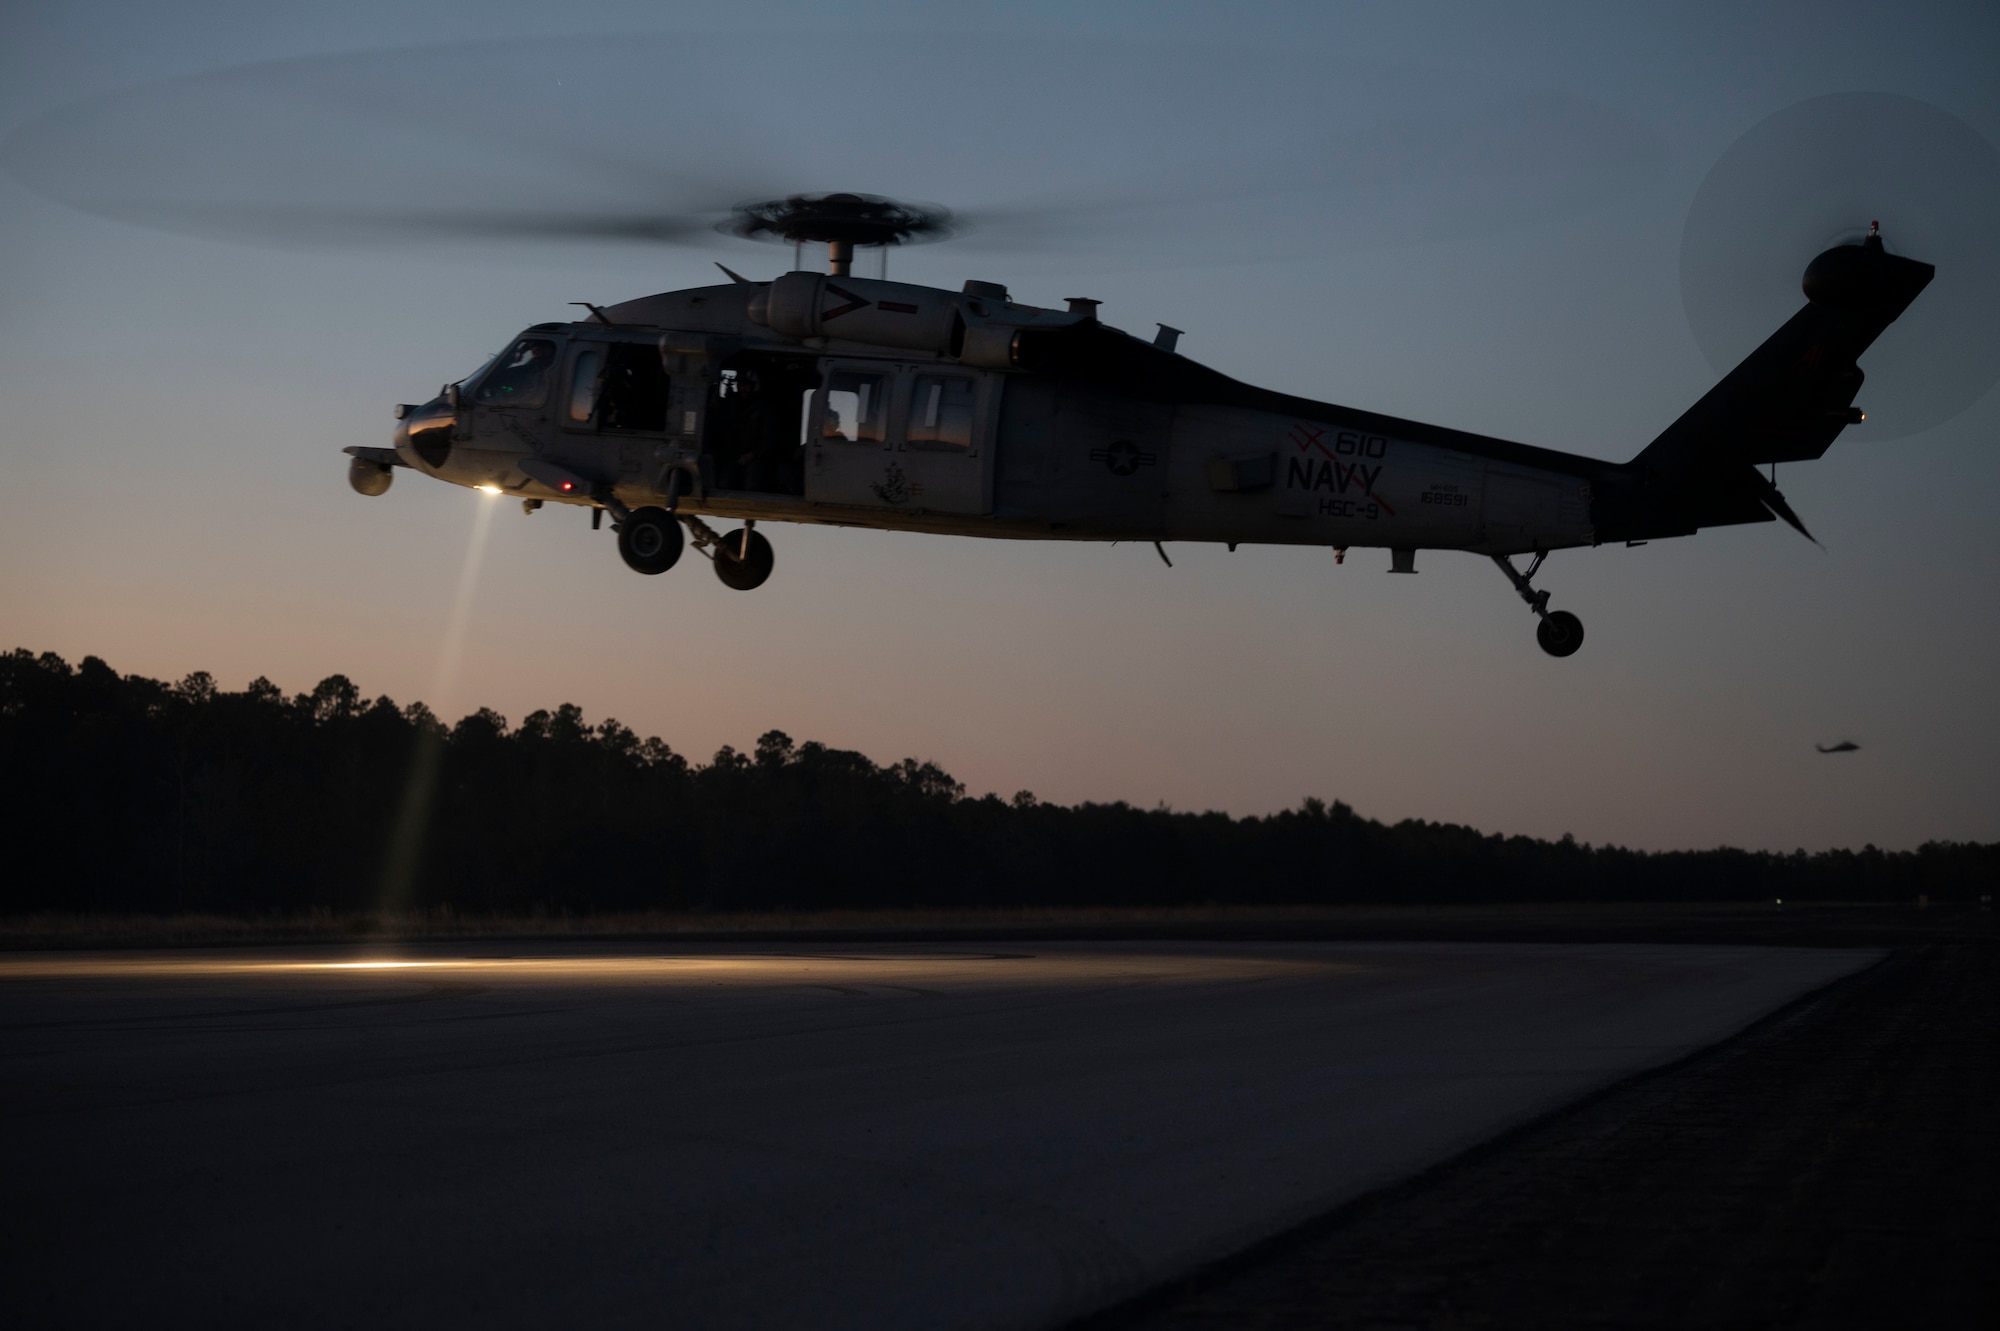 A U.S. Navy MH-60 Seahawk Helicopter, assigned to Helicopter Sea Combat Squadron 9, prepares to land at a forward area refueling point during Emerald Warrior 21.1, at Hurlburt Field, Florida, Feb. 20, 2021. Emerald Warrior is the largest joint special operations exercise involving U.S. Special Operations Command forces training to respond to various threats across the spectrum of conflict. Exercises like EW give theater commanders the assurance SOF forces can respond quickly — on time, every time. (U.S. Air Force photo by Senior Airman Edward Coddington)